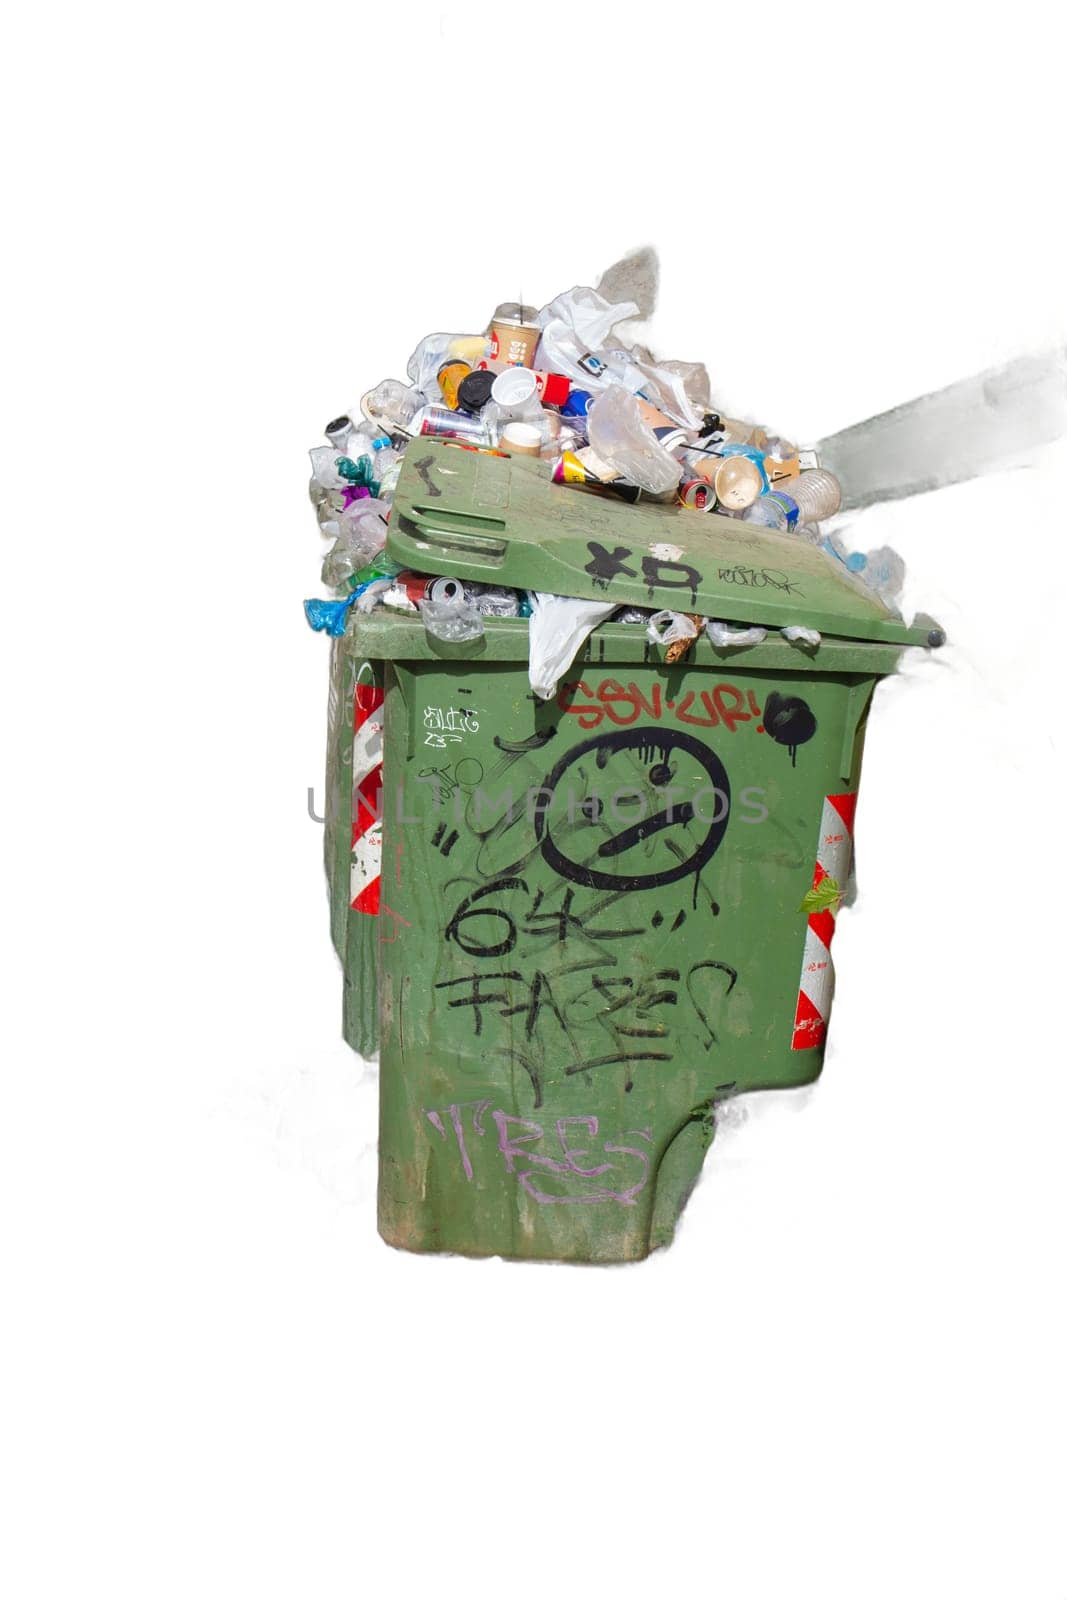 An isolated image of a bin overflowing with garbage. Perfect for waste management graphics, environmental campaigns, and sanitation awareness materials